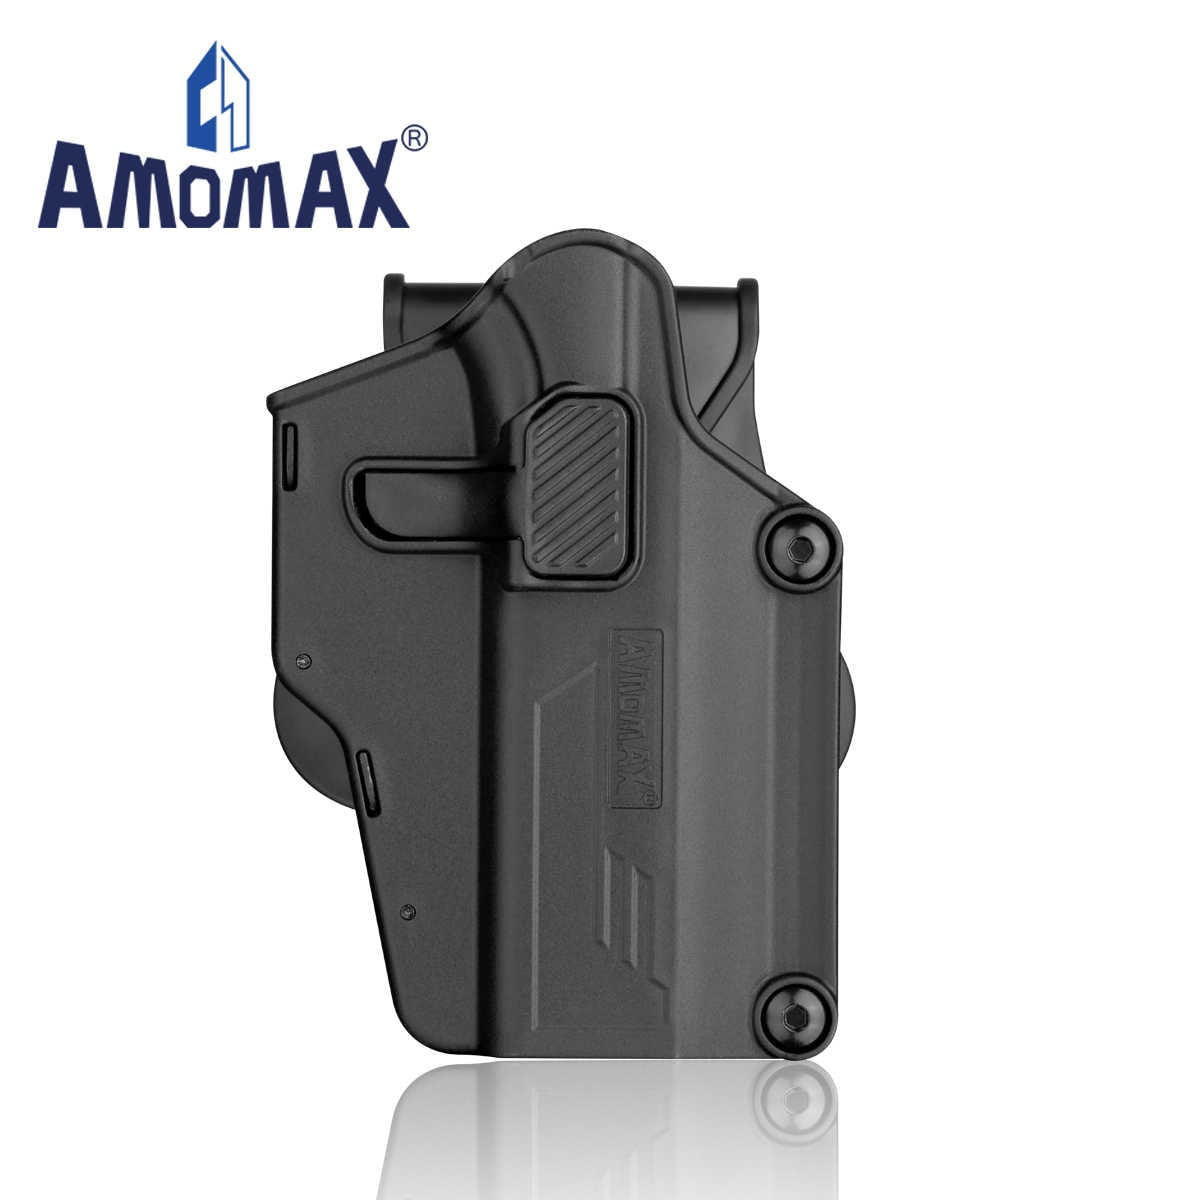 AMOMAX AM-UH Per-Fit Multi Fit Holster (Black / FDE / OD Green